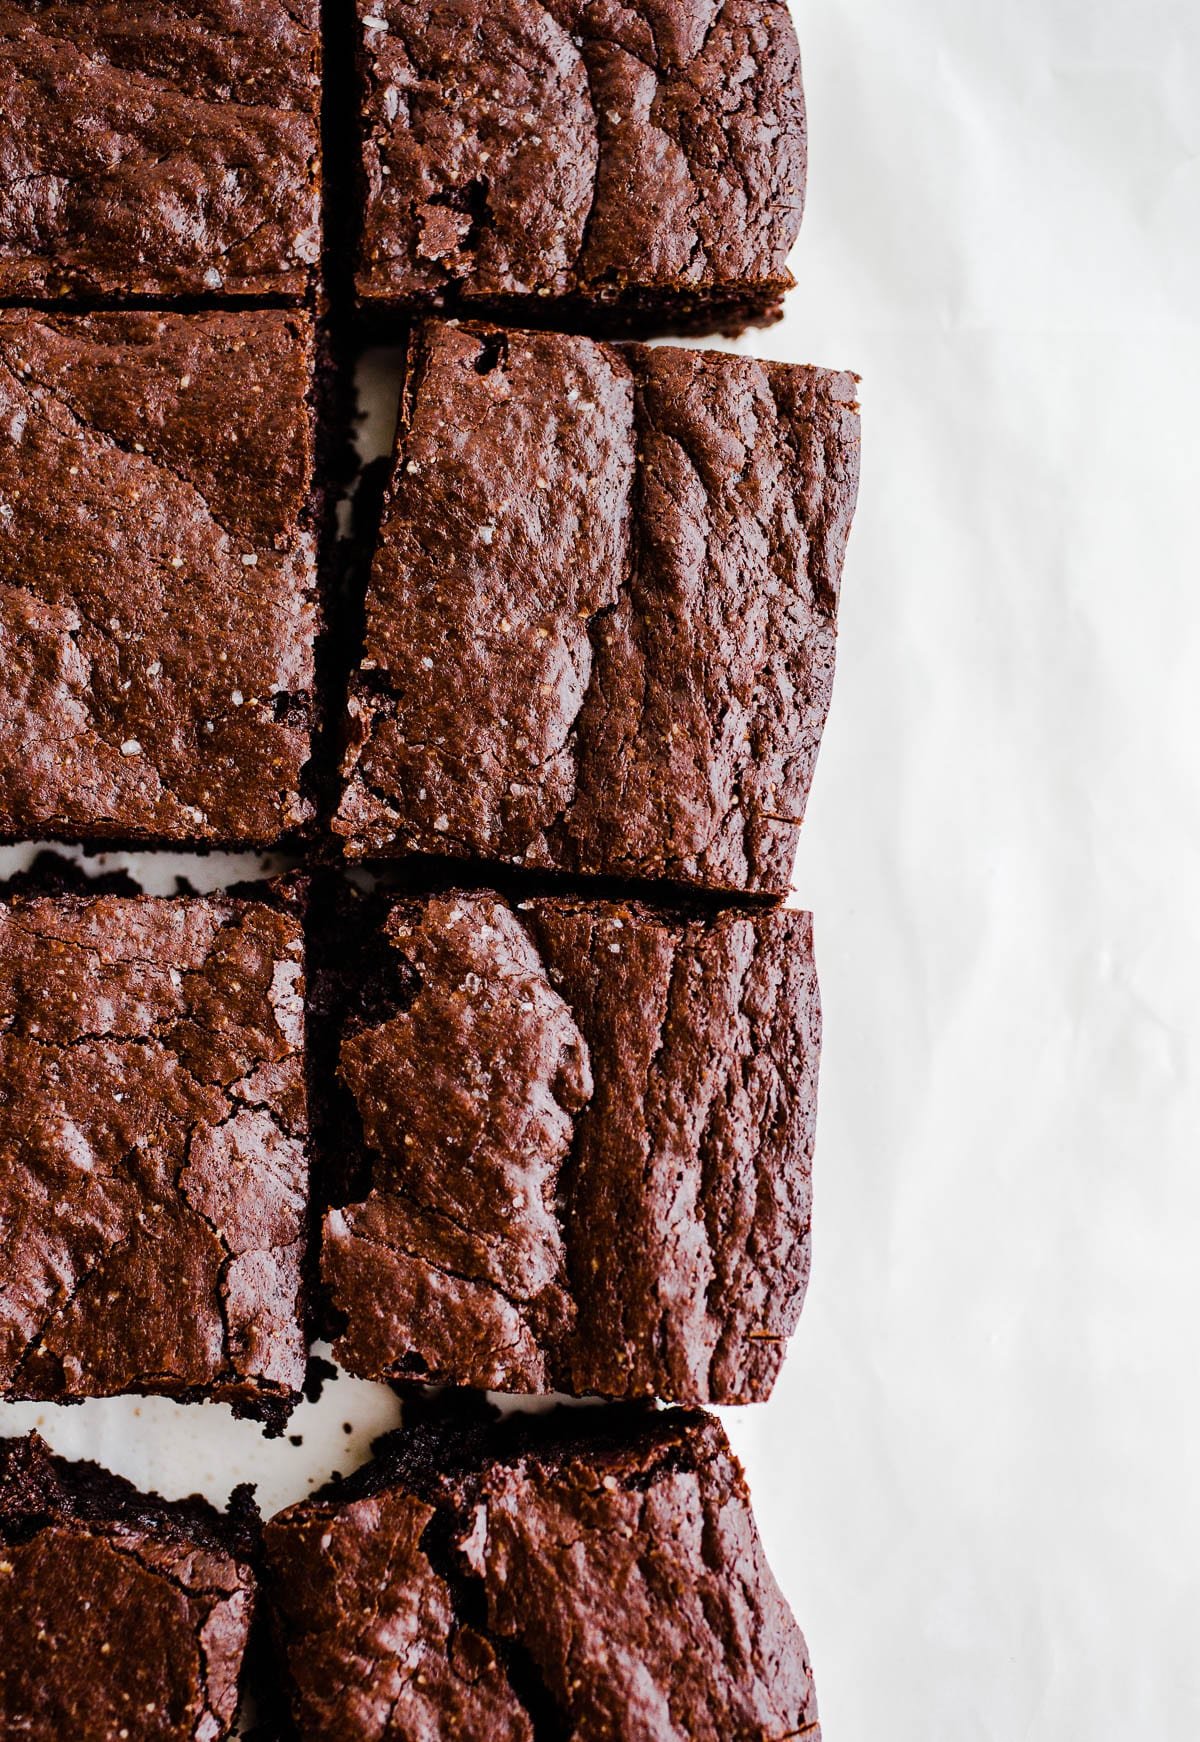 Edge brownies on a piece of parchment paper.